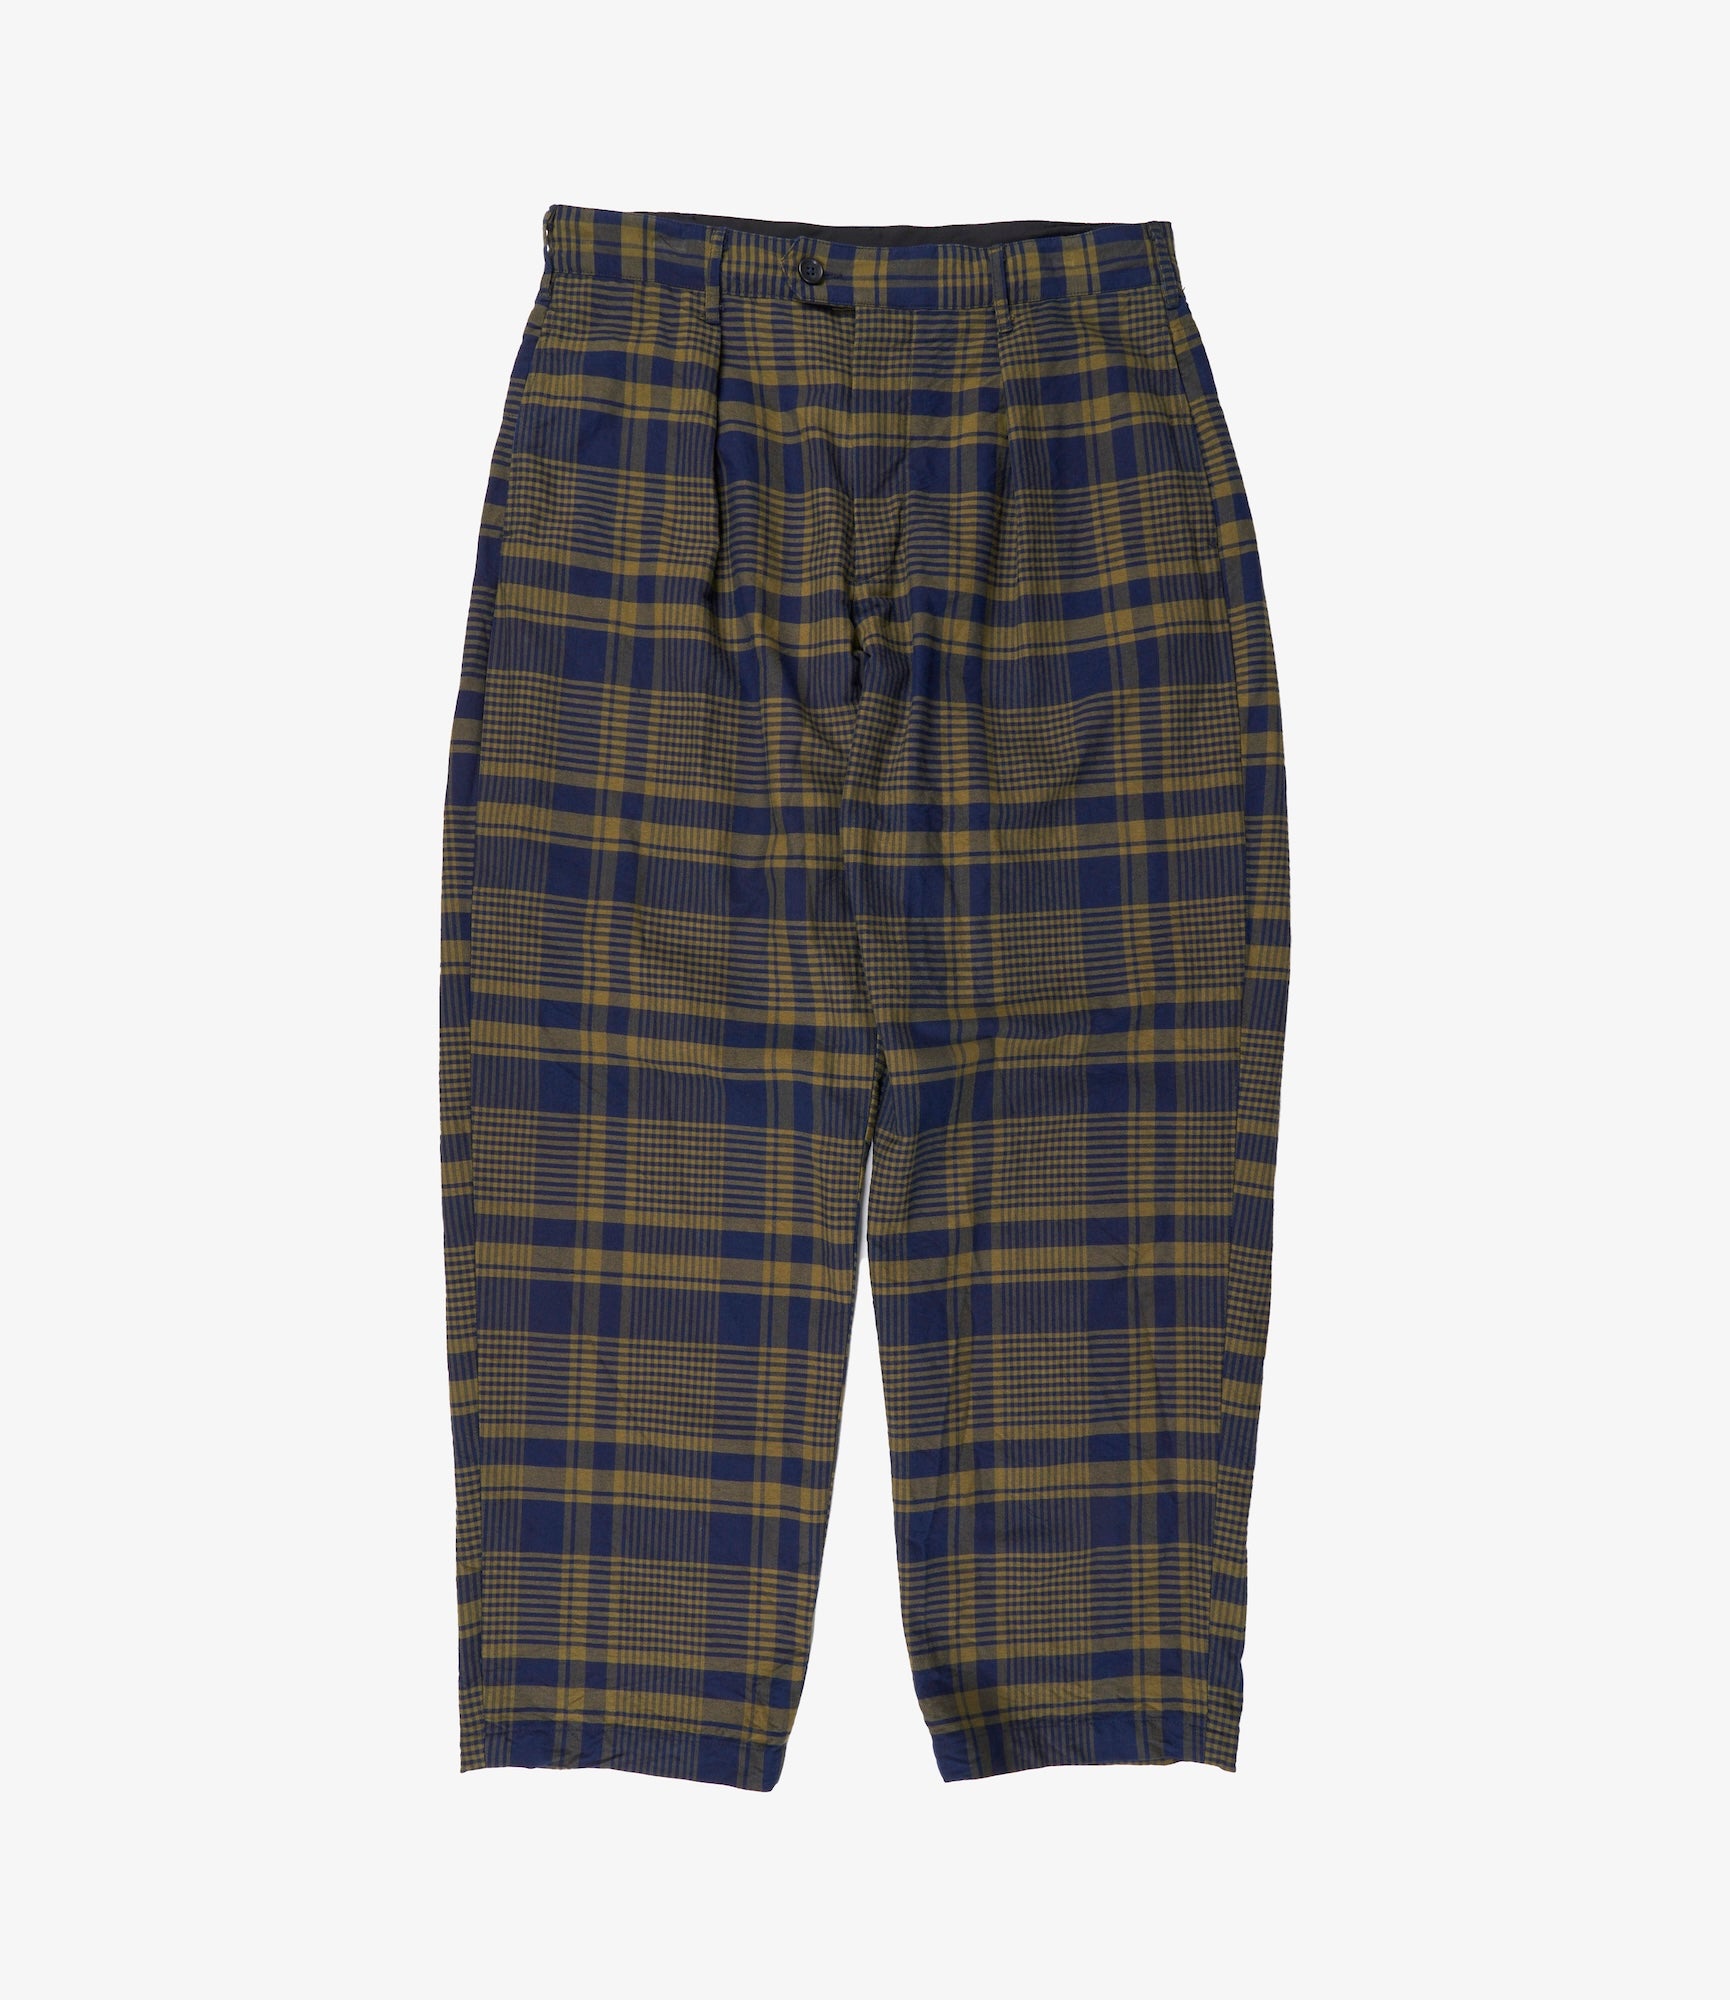 Engineered Garments Carlyle Pant - Navy/Olive Cotton Plaid